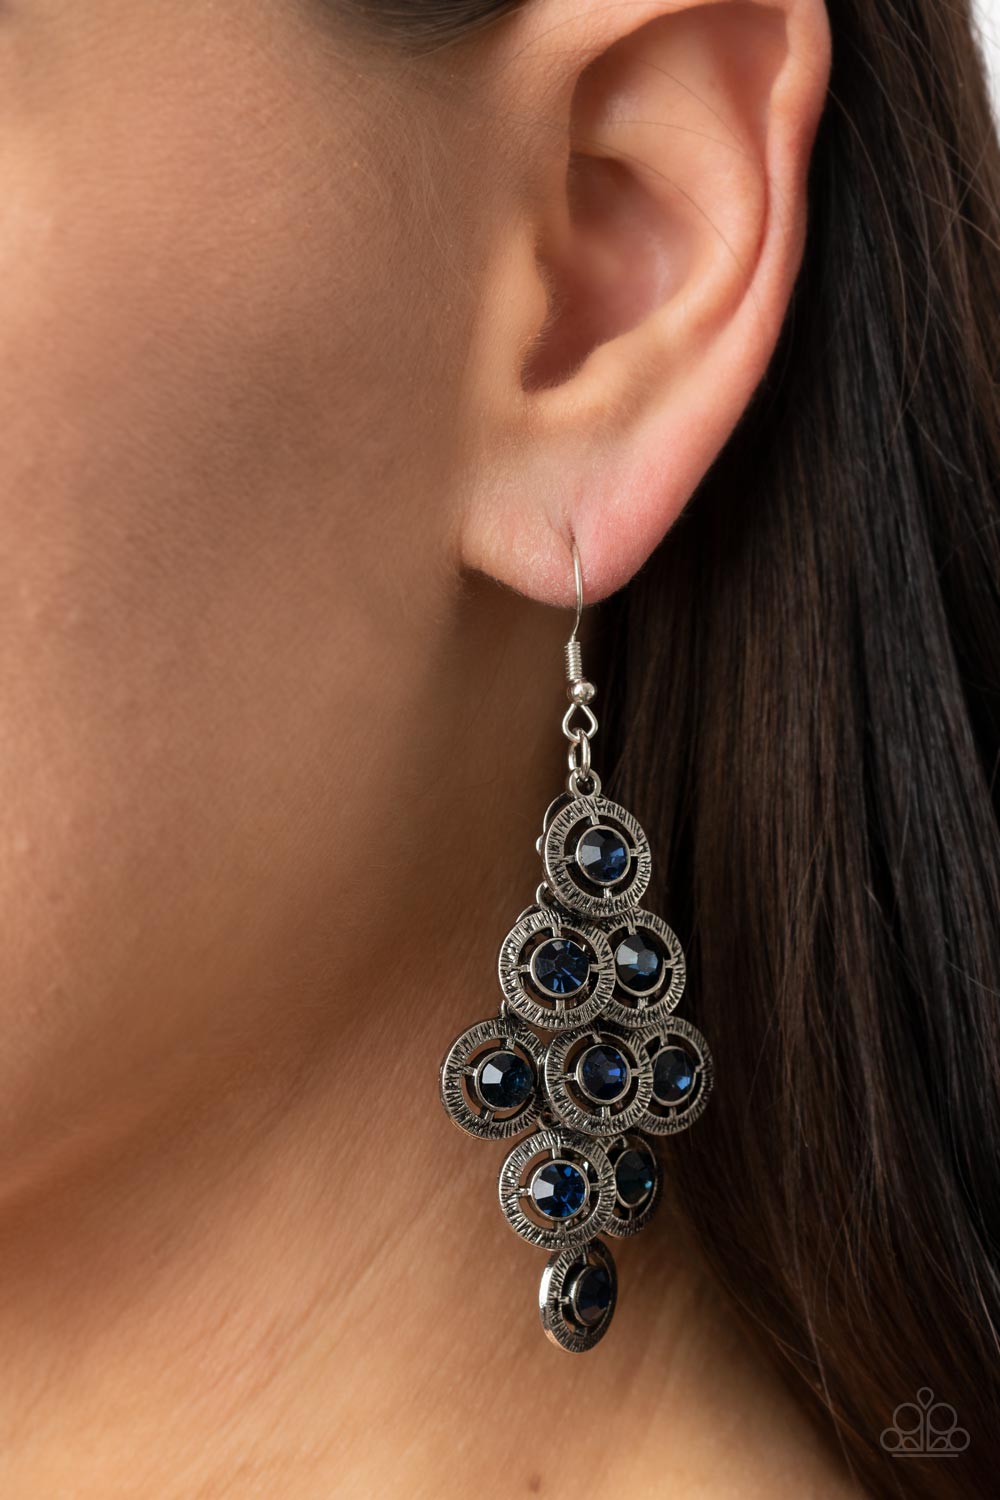 Paparazzi Constellation Cruise Earring. Blue Fringe Cascading earring. $5 Jewelry. #P5RE-BLXX-257XX